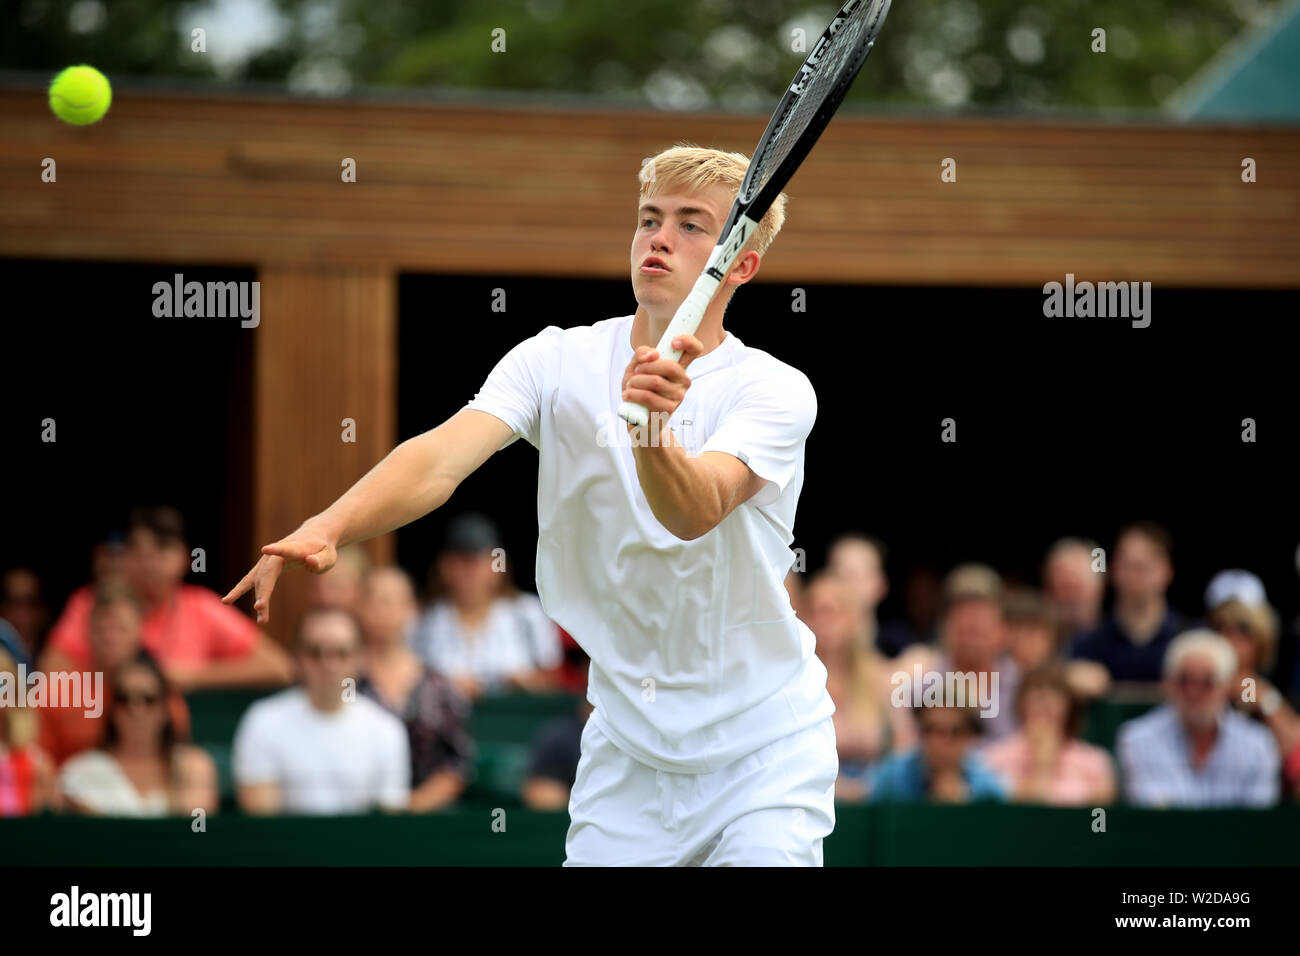 Felix Gill in action against Nicolas Alvarez Varona in the boys singles on day seven of the Wimbledon Championships at the All England Lawn tennis and Croquet Club, Wimbledon Stock Photo -